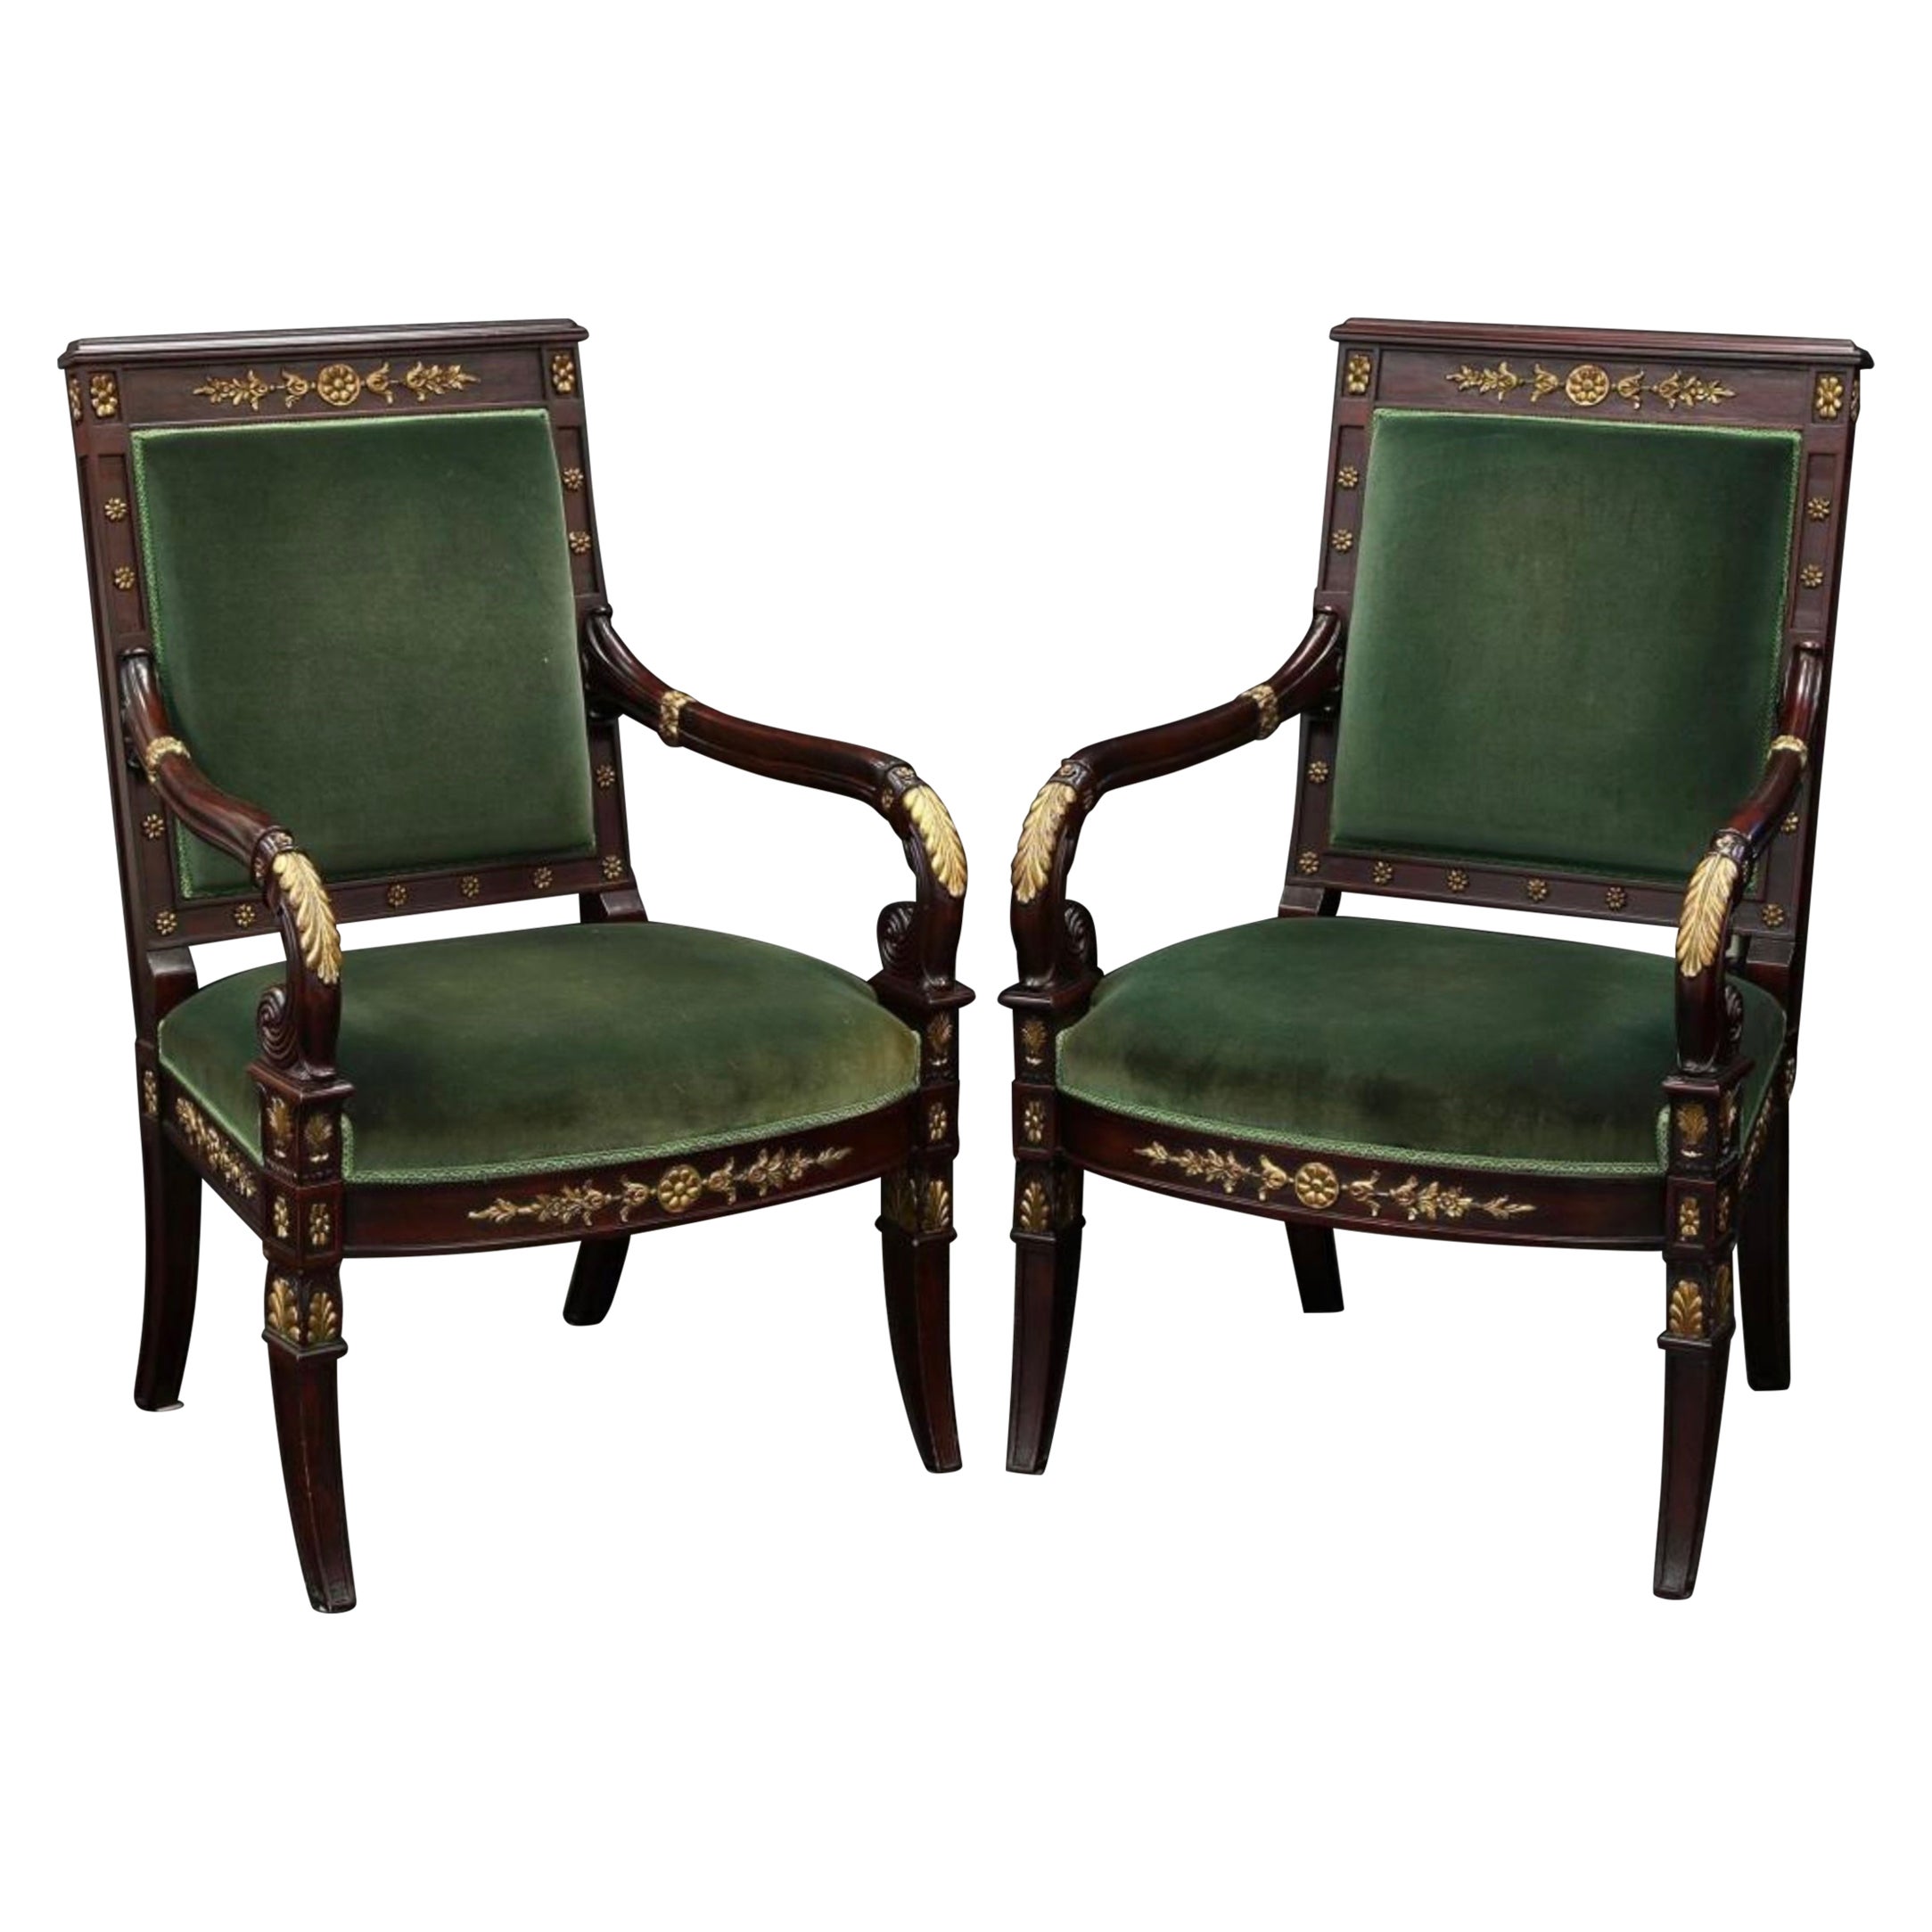 20th-C. Fruitwood and Giltwood Italian Bergere Chairs in Green Velvet, Pair